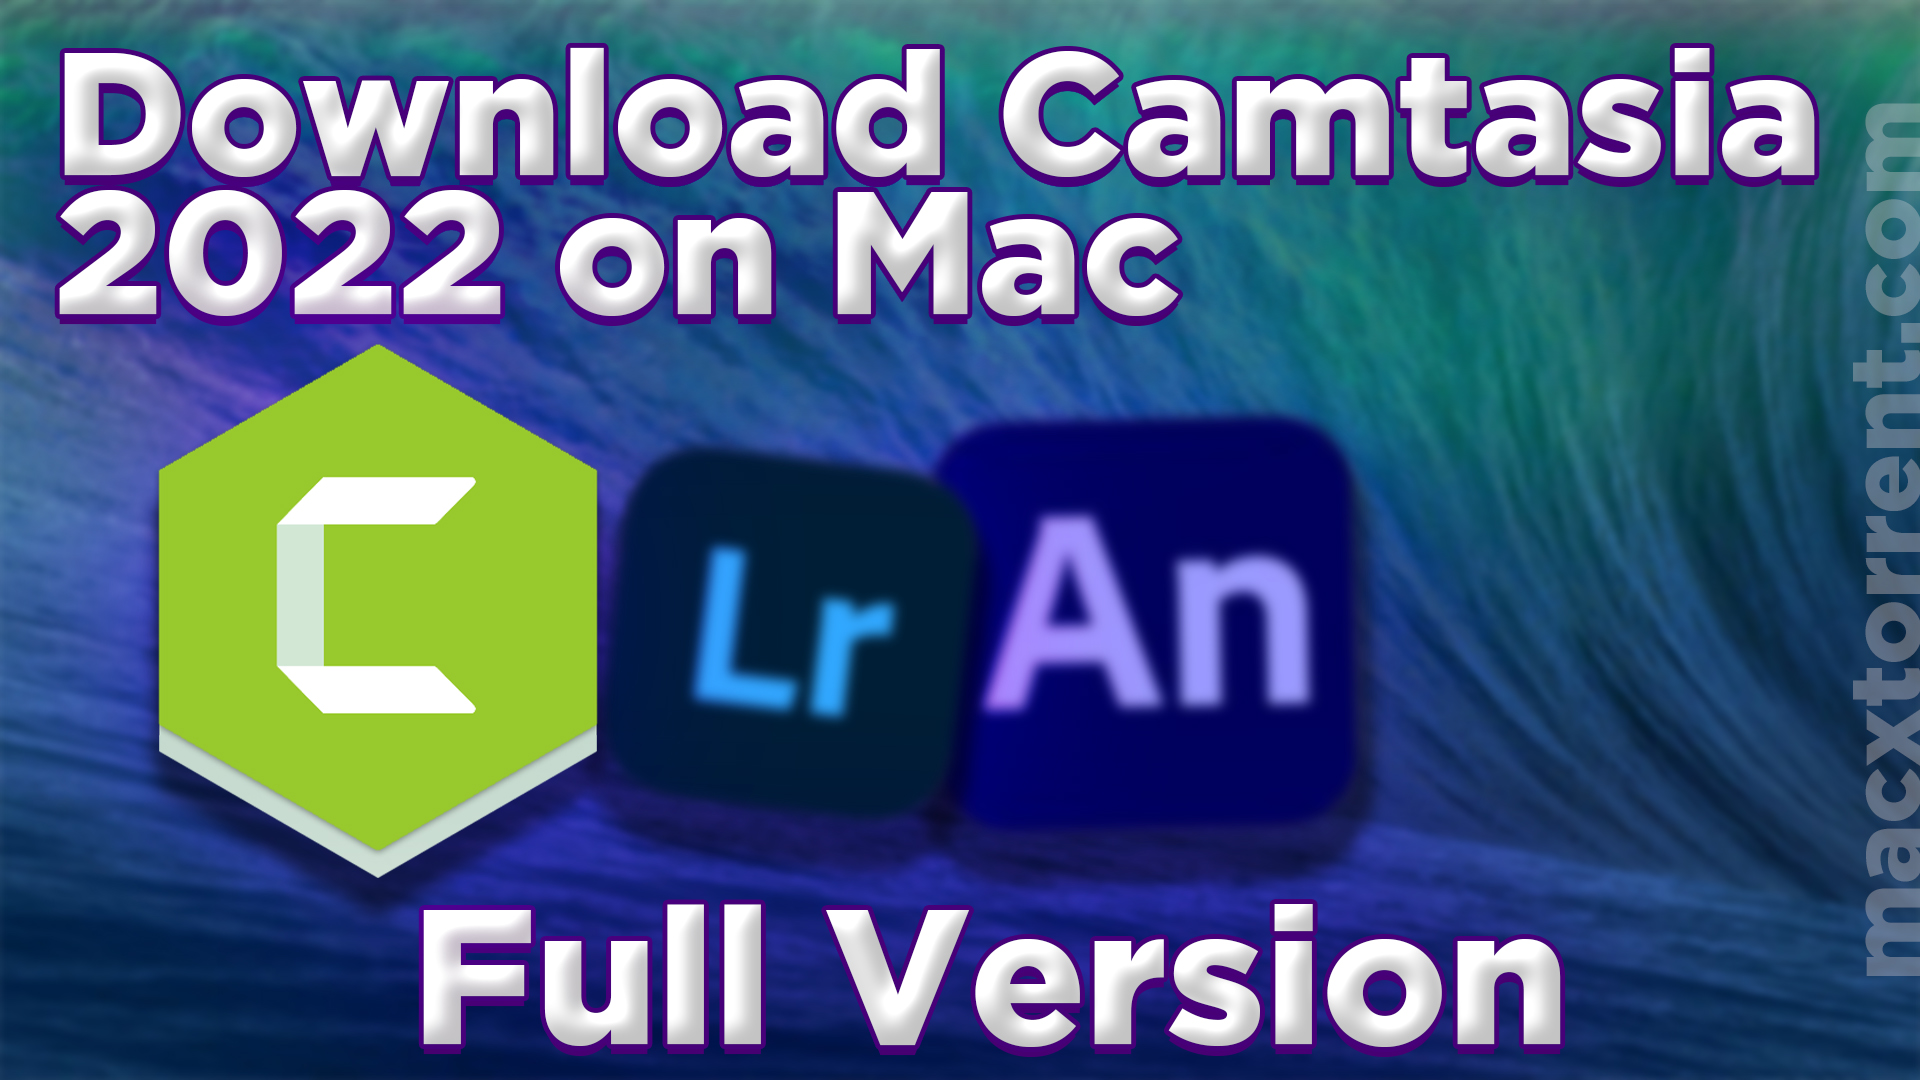 Download Camtasia 2022 on Mac